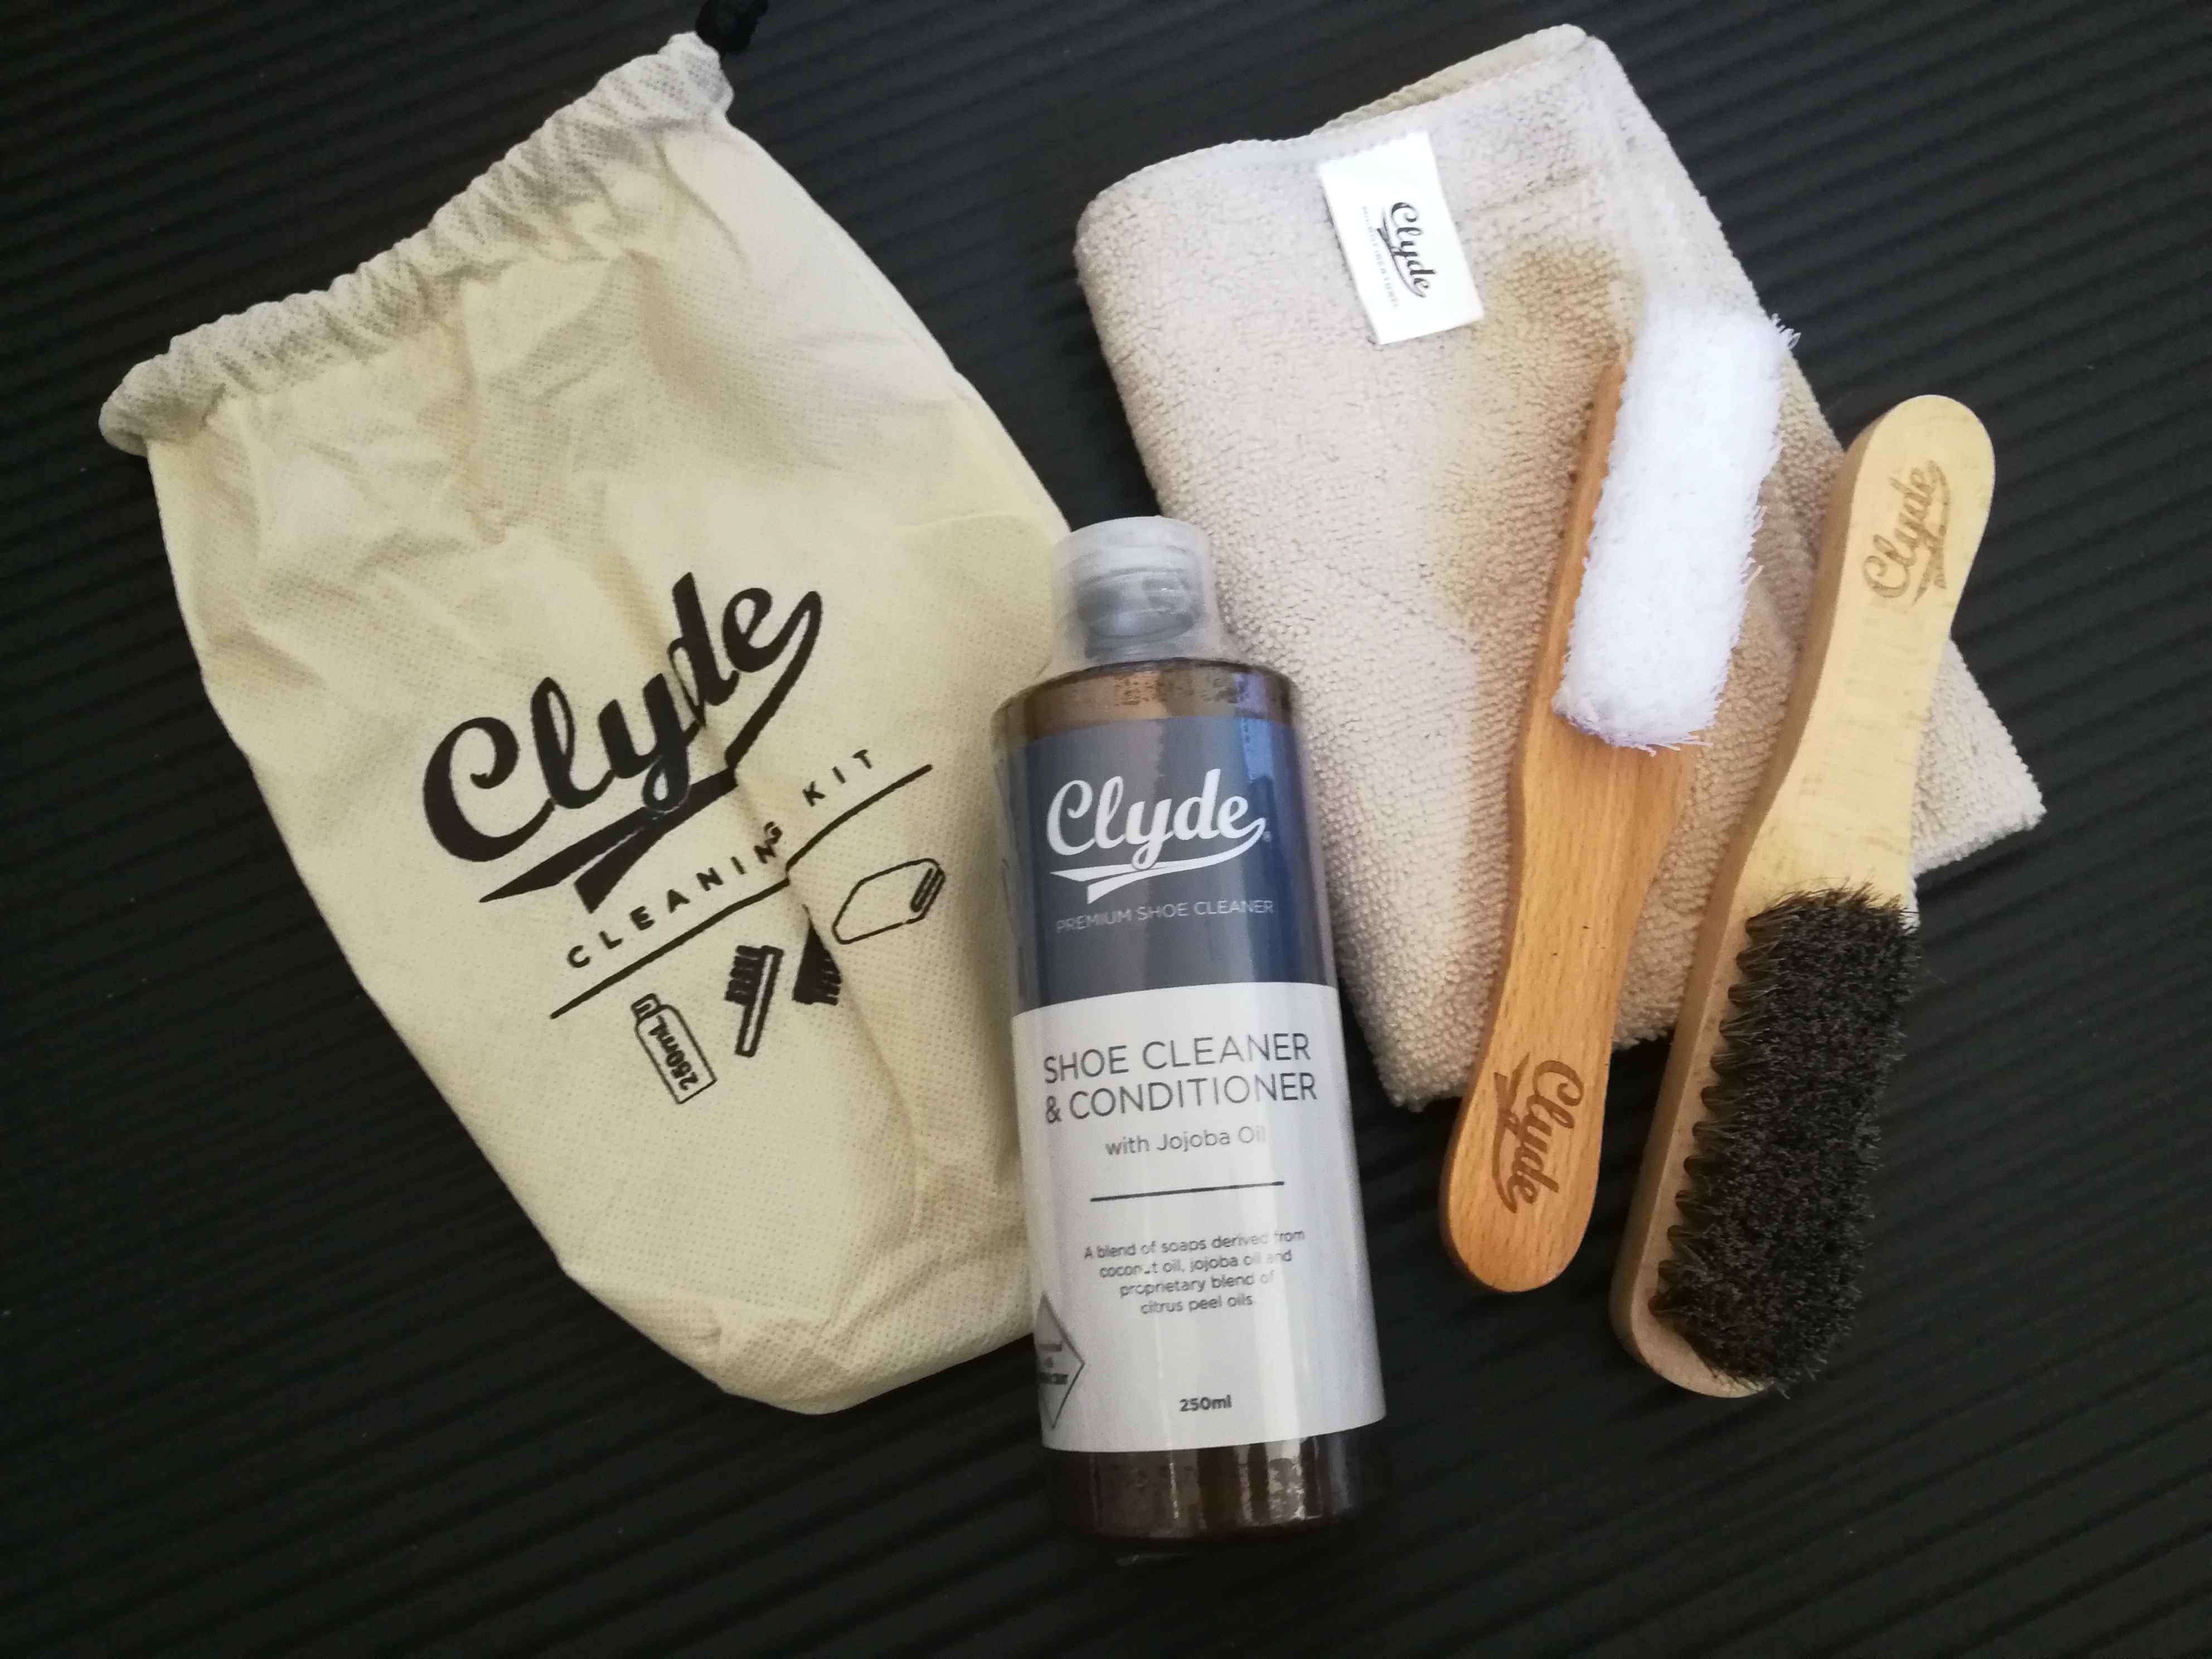 Clyde Shoe Cleaner Kit with Disinfectant | Shopee Philippines